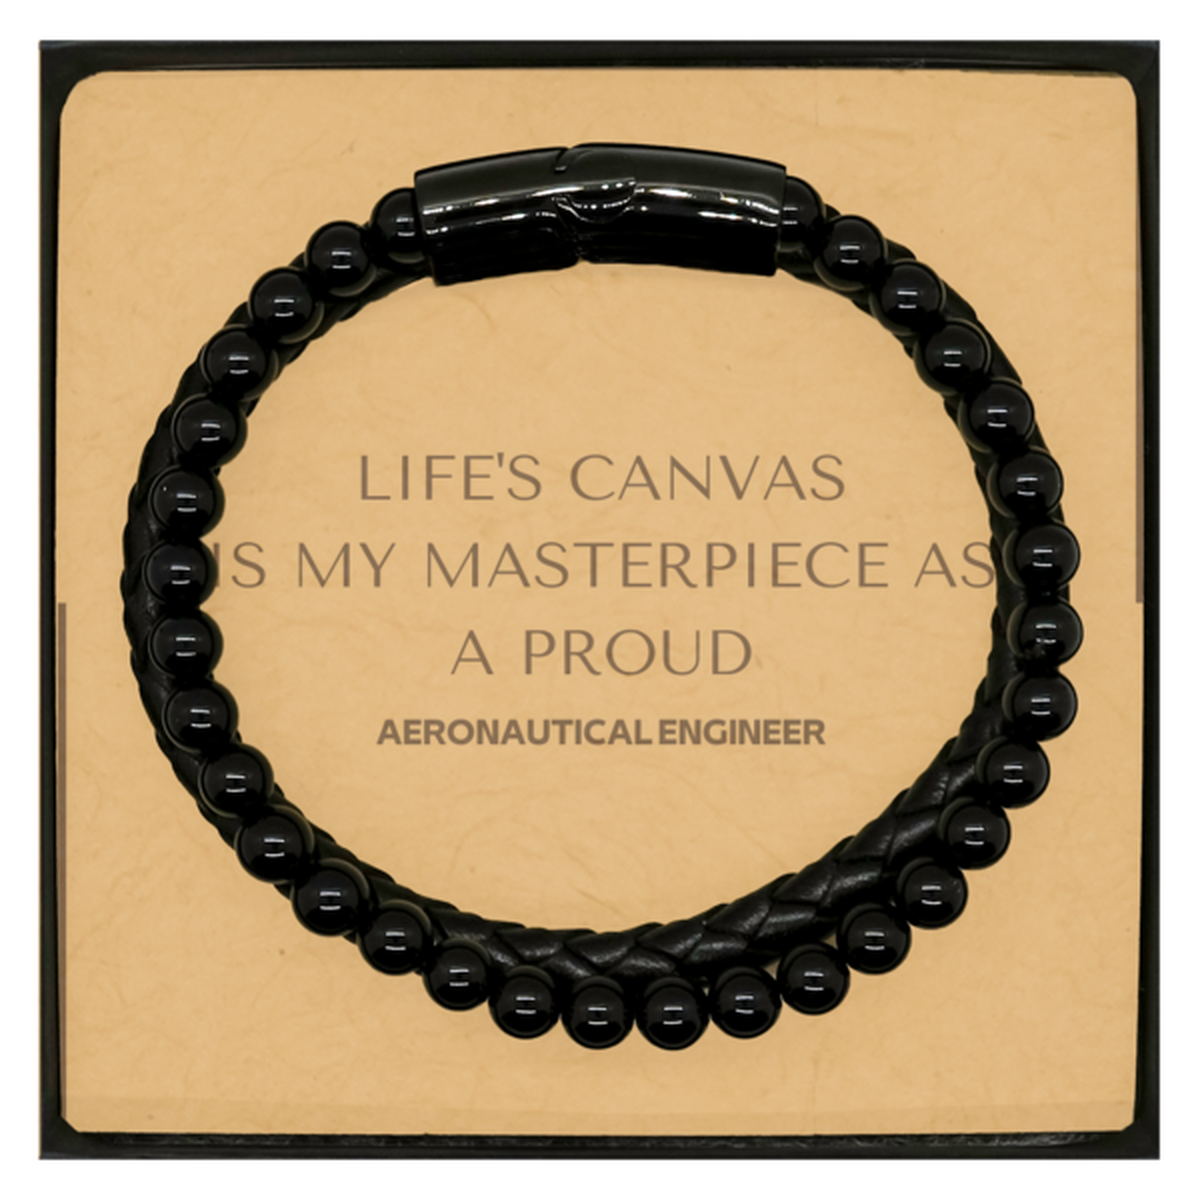 Proud Aeronautical Engineer Gifts, Life's canvas is my masterpiece, Epic Birthday Christmas Unique Stone Leather Bracelets For Aeronautical Engineer, Coworkers, Men, Women, Friends